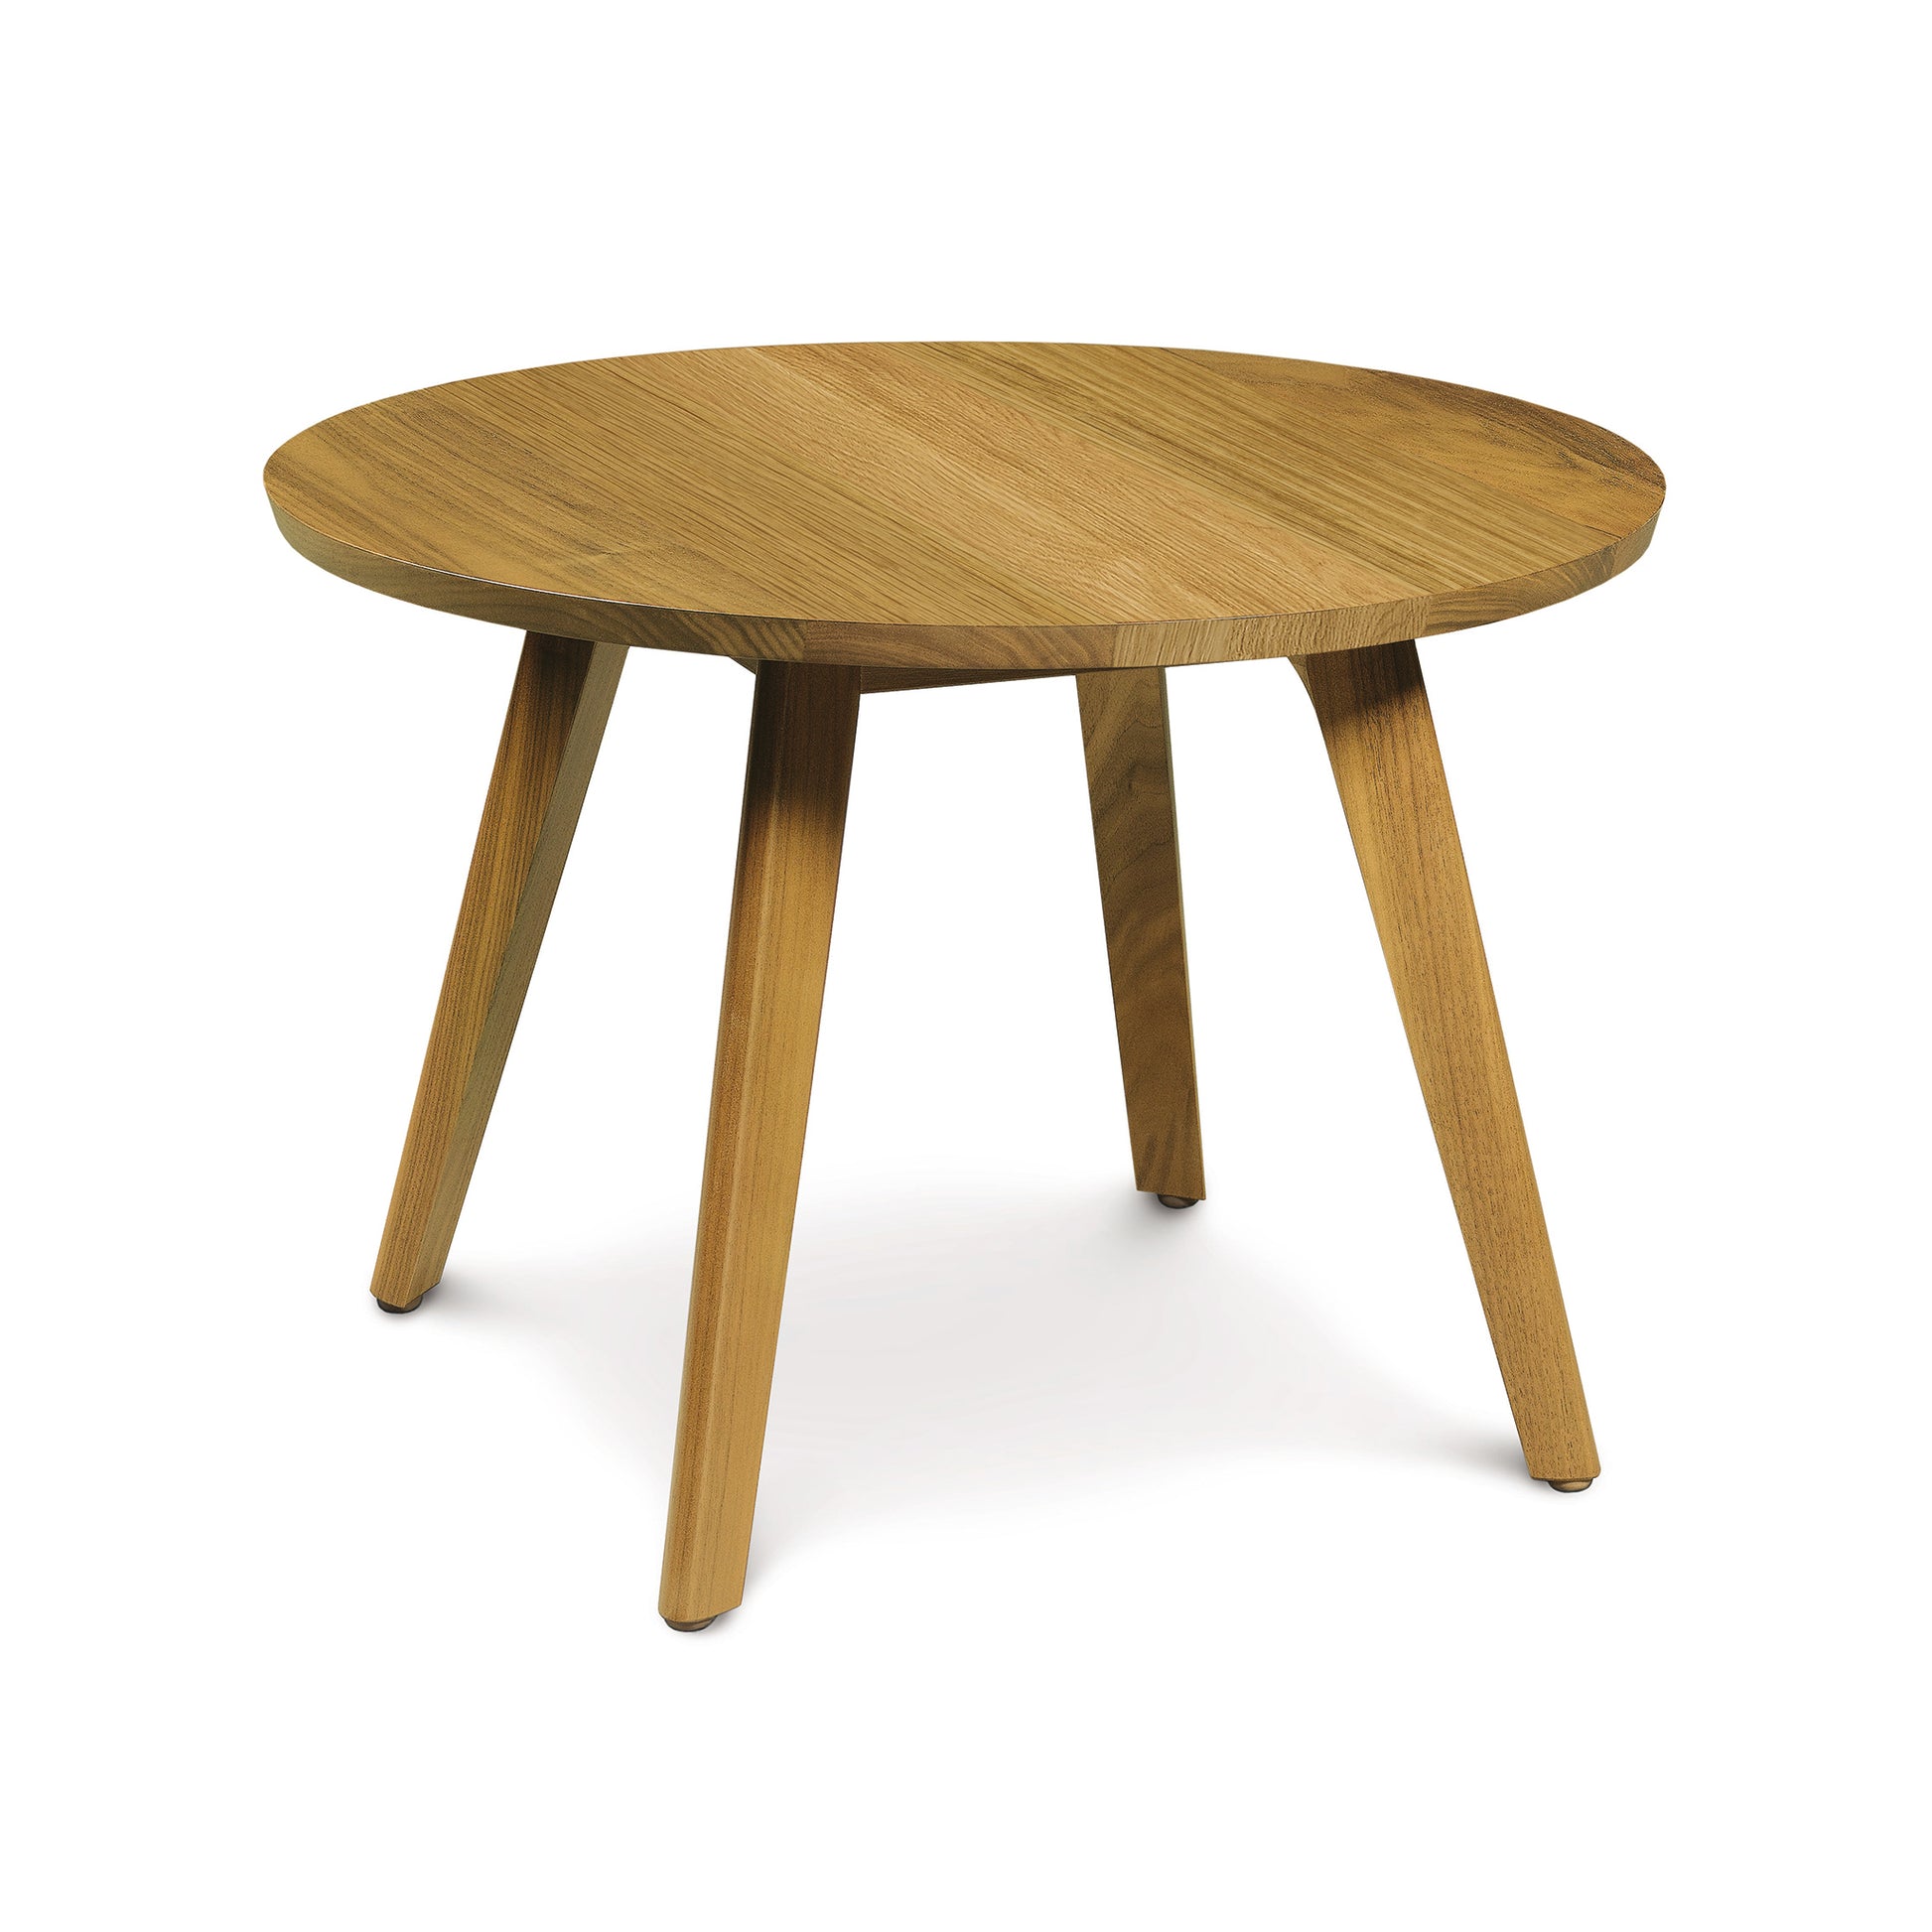 A round wooden Catalina Side Table with two legs on a white background. This handmade furniture piece is part of the Copeland Furniture Copeland Catalina furniture collection.